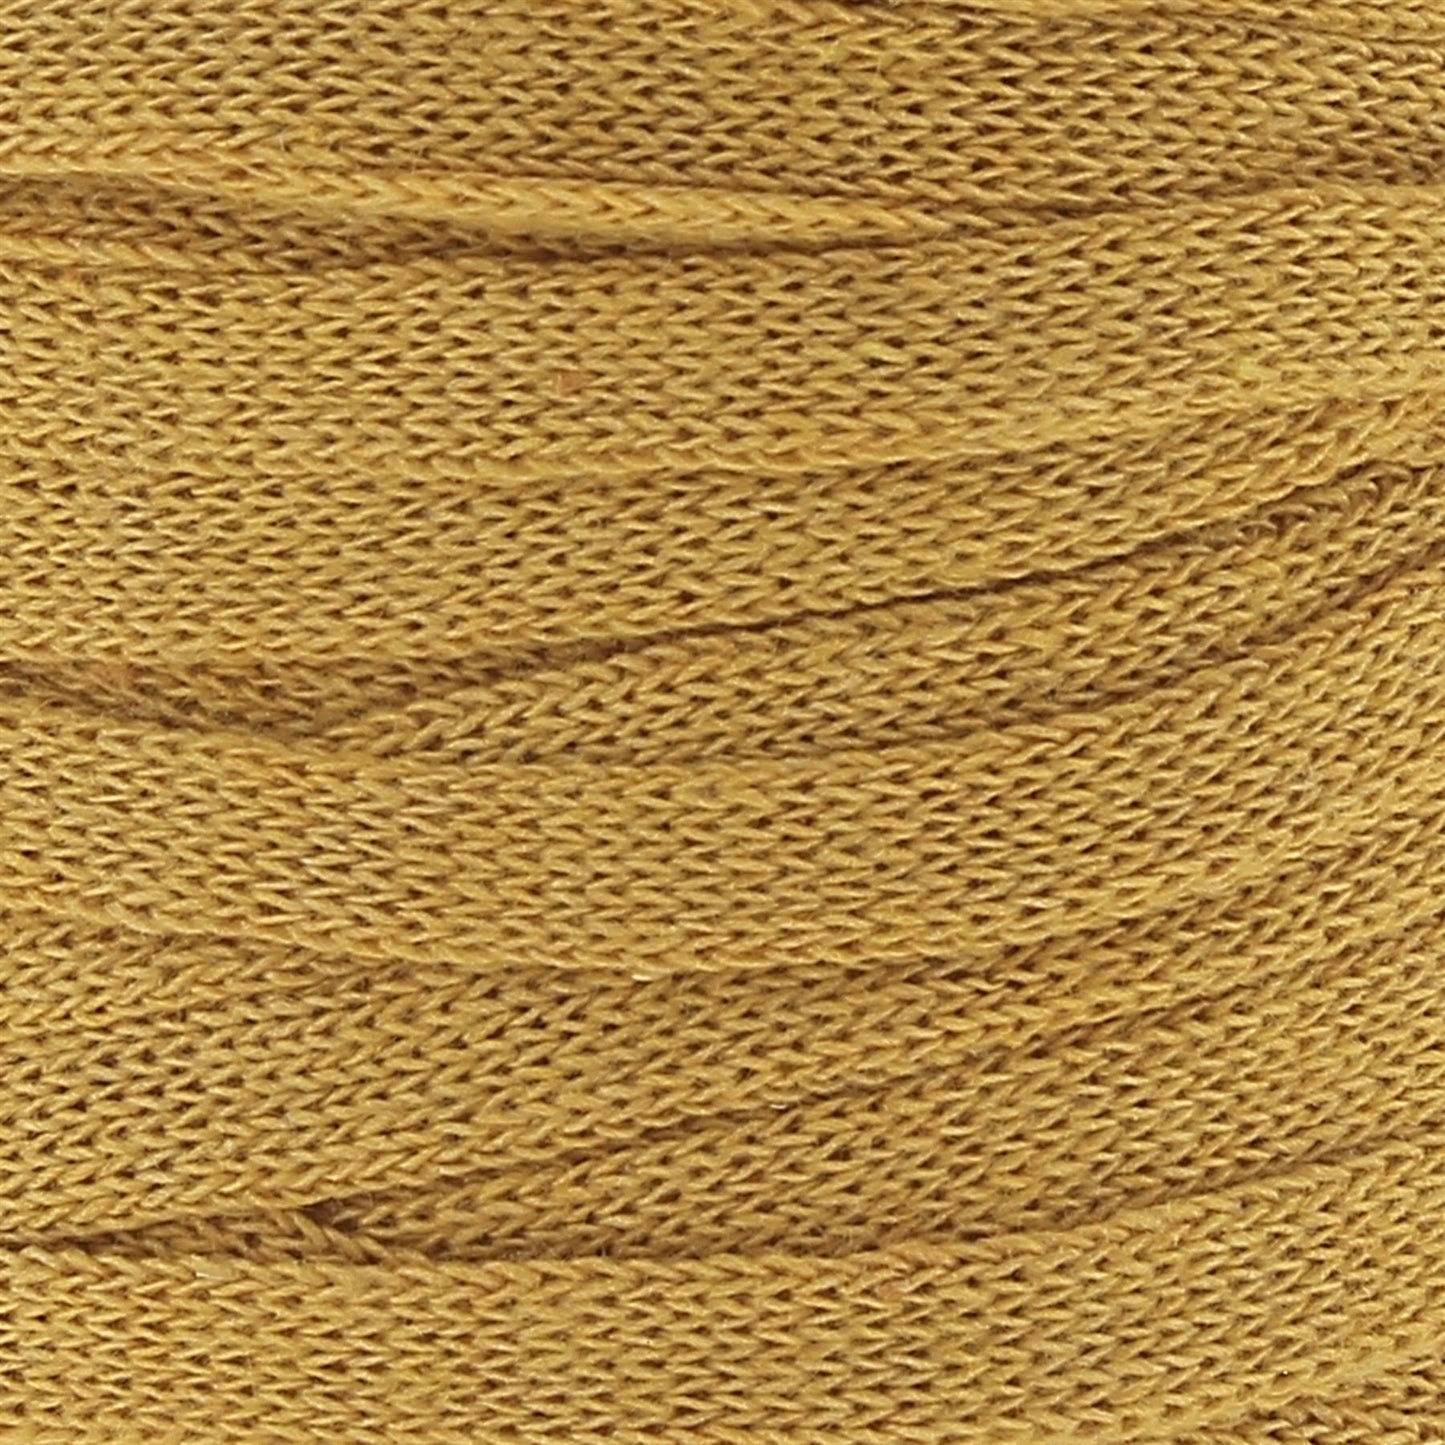 [Hoooked] RXL53MINI RibbonXL Harvest Ocre Cotton Yarn - 60M, 125g